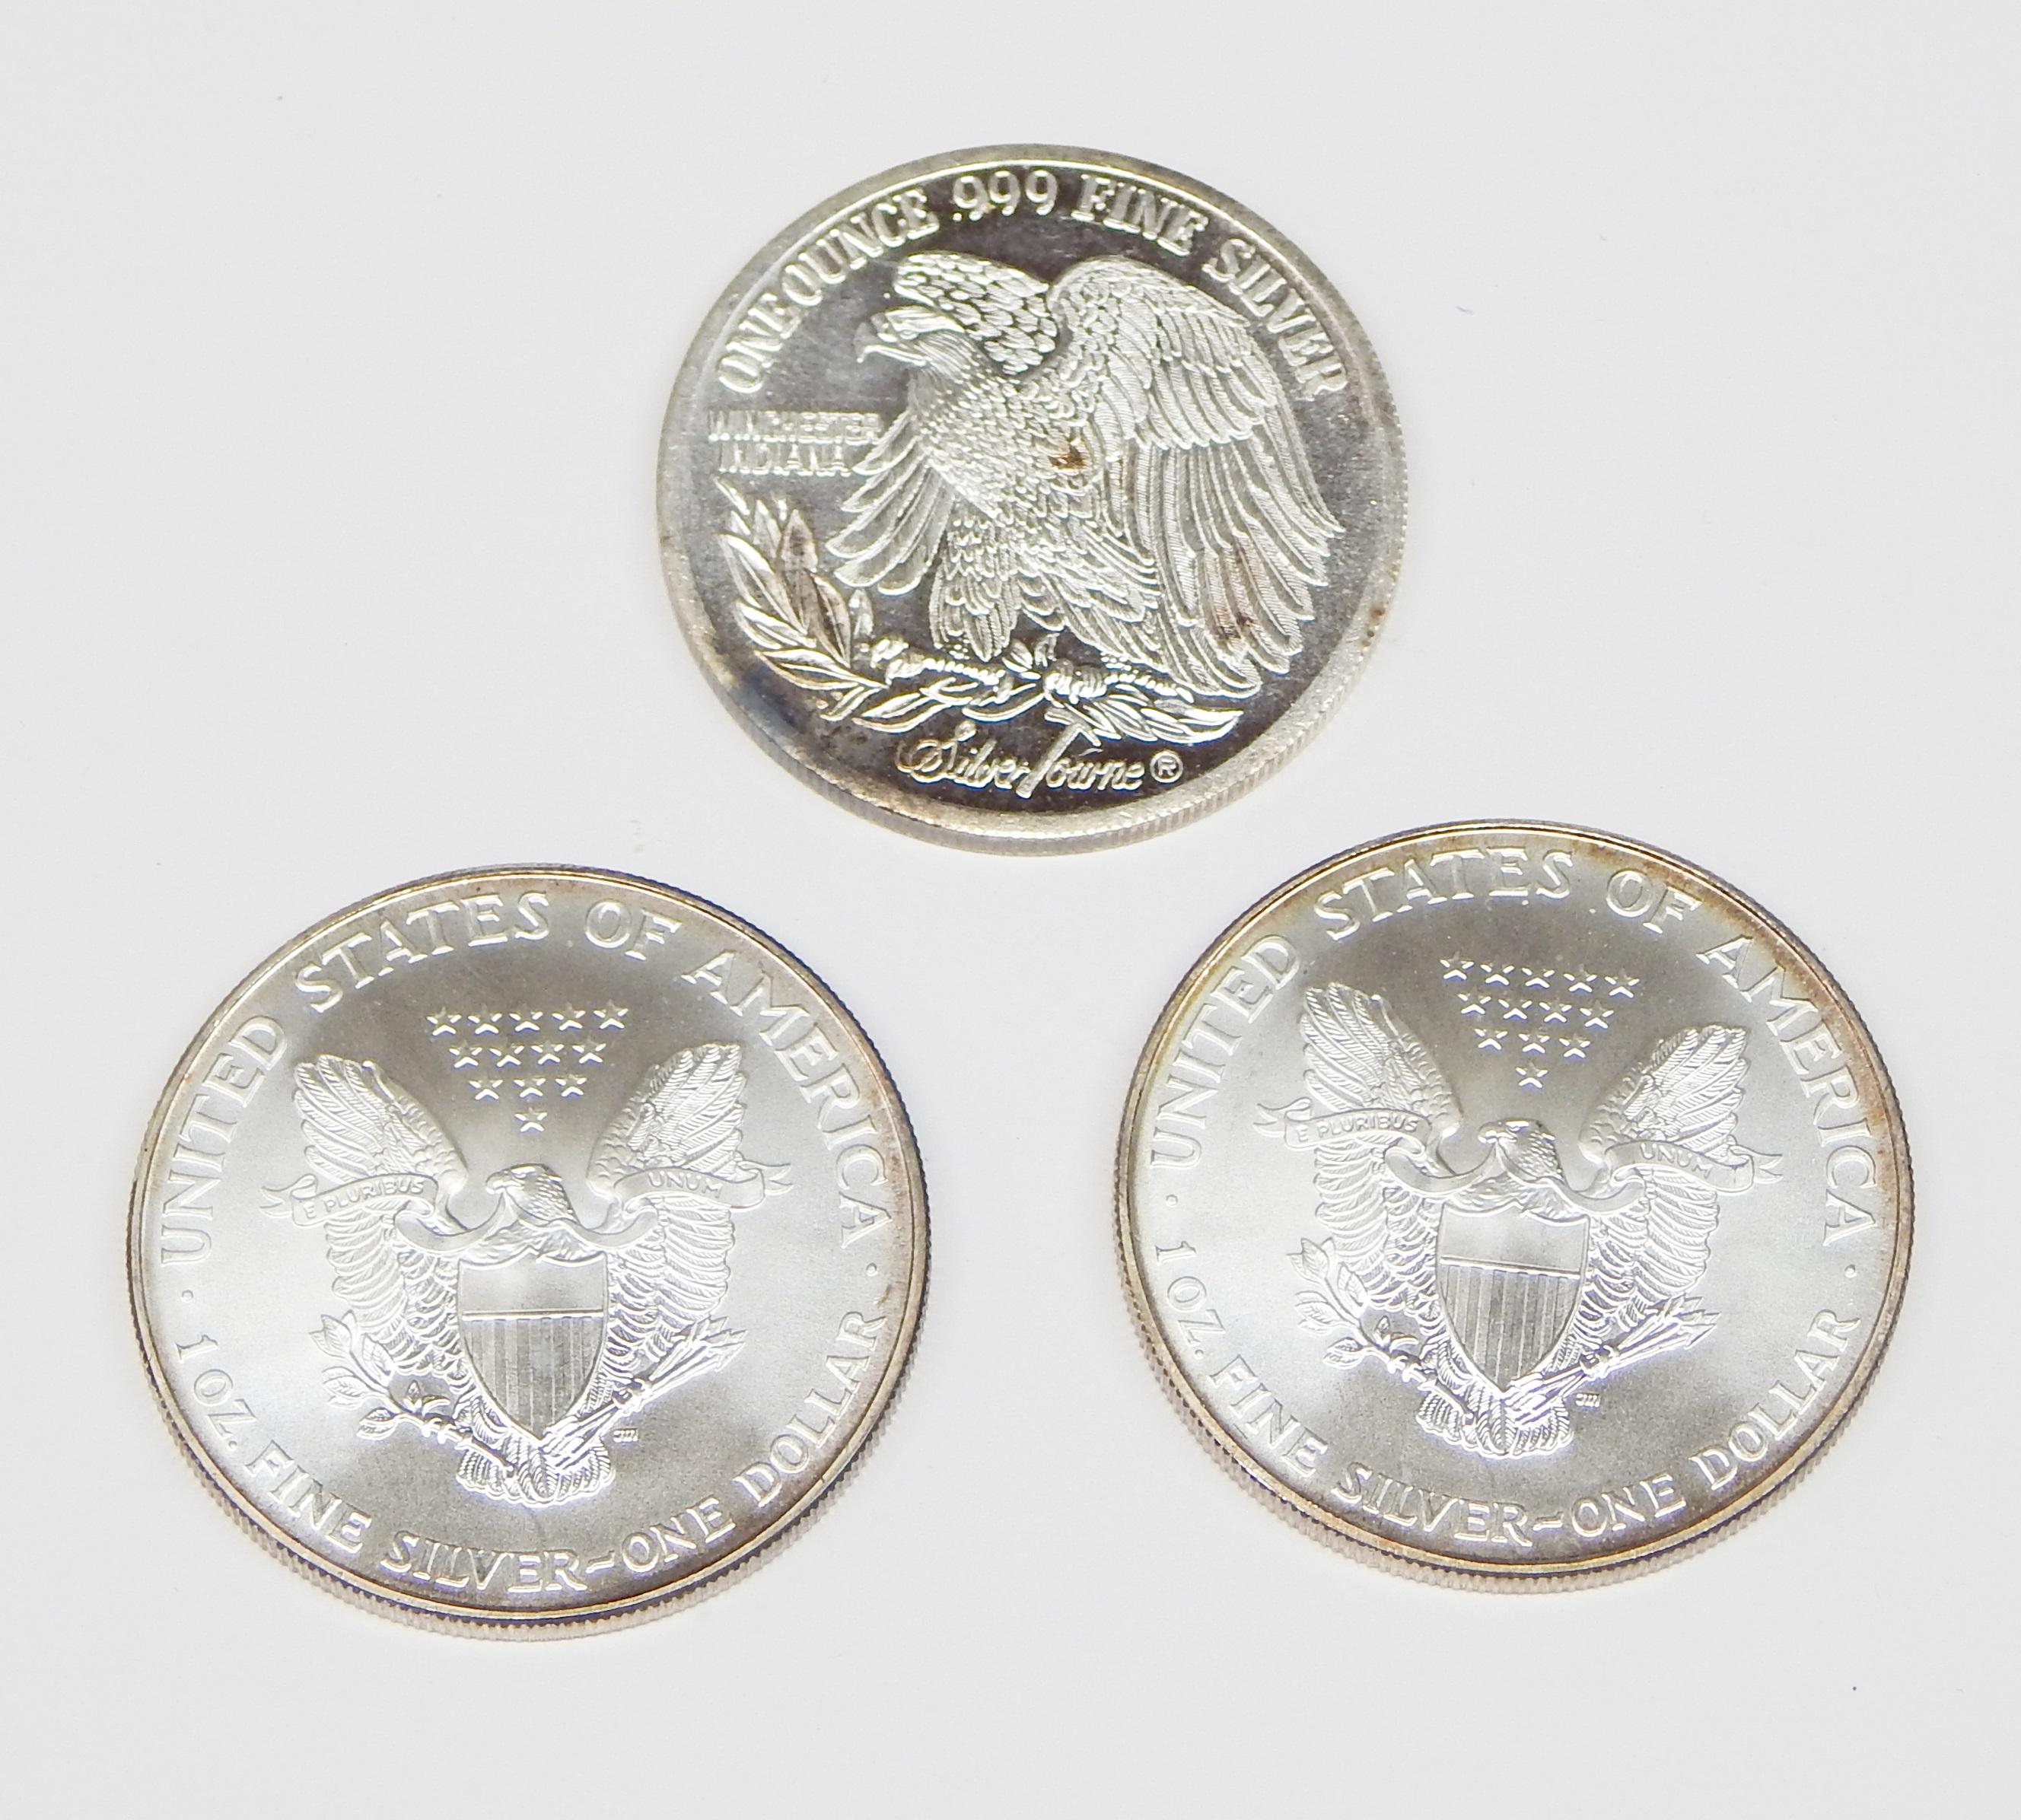 TWO (2) 1995 SILVER EAGLES and 1 oz SILVERTOWNE .999 SILVER ROUND